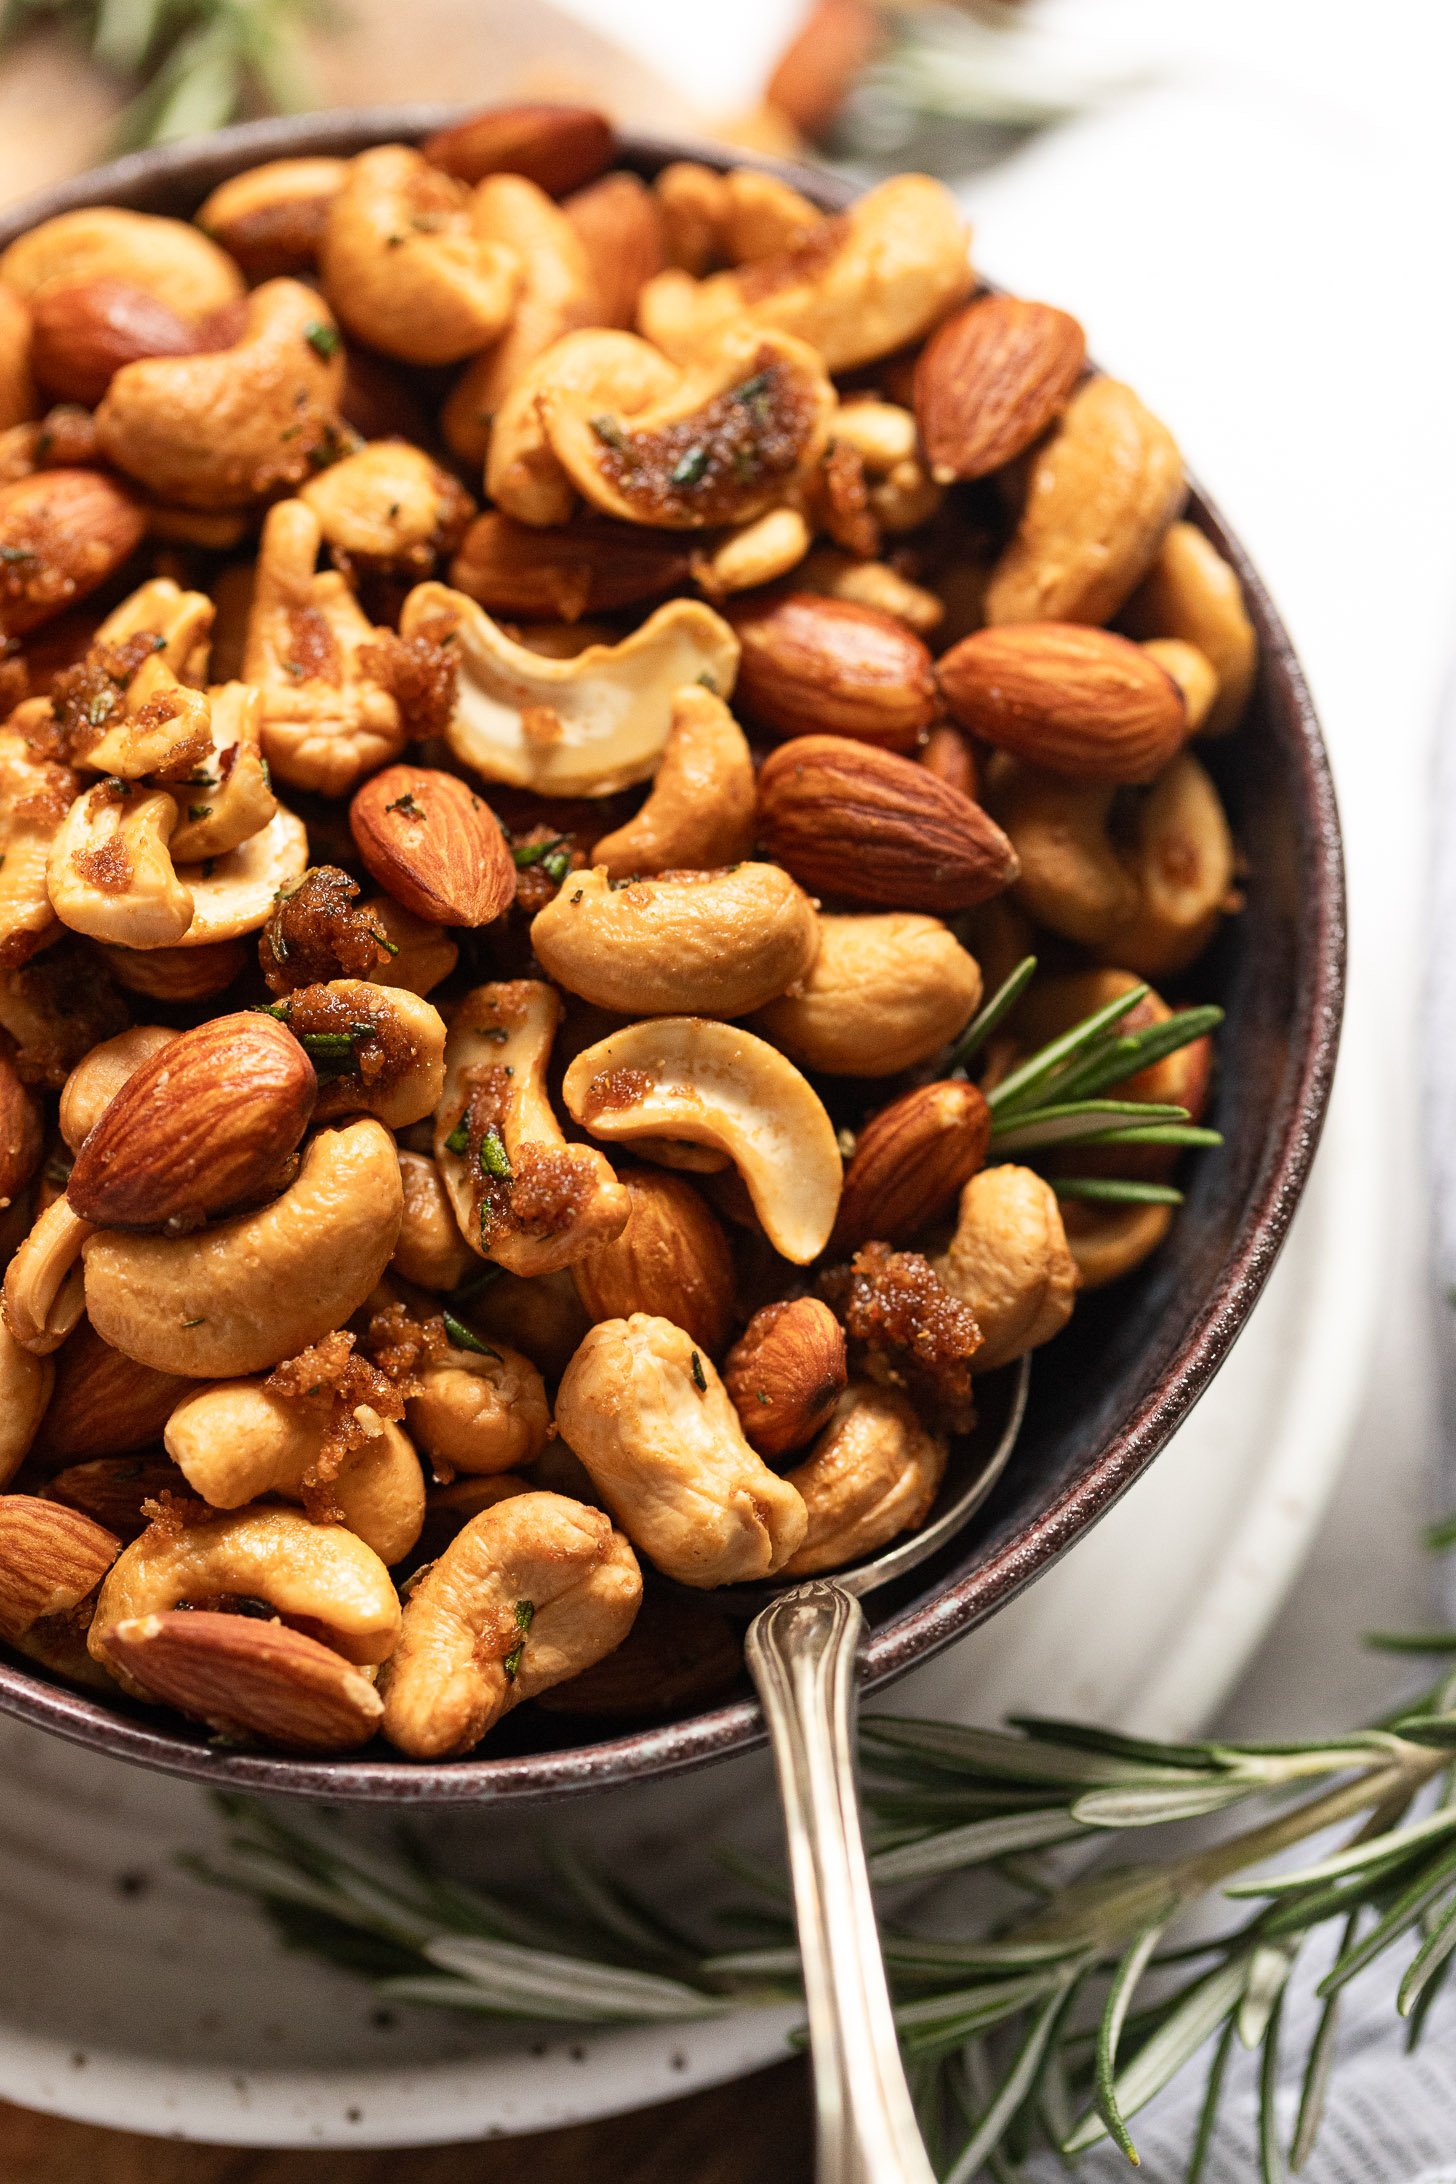 Side view of bowl of roasted sweet and spicy nuts with spoon and rosemary garnish.